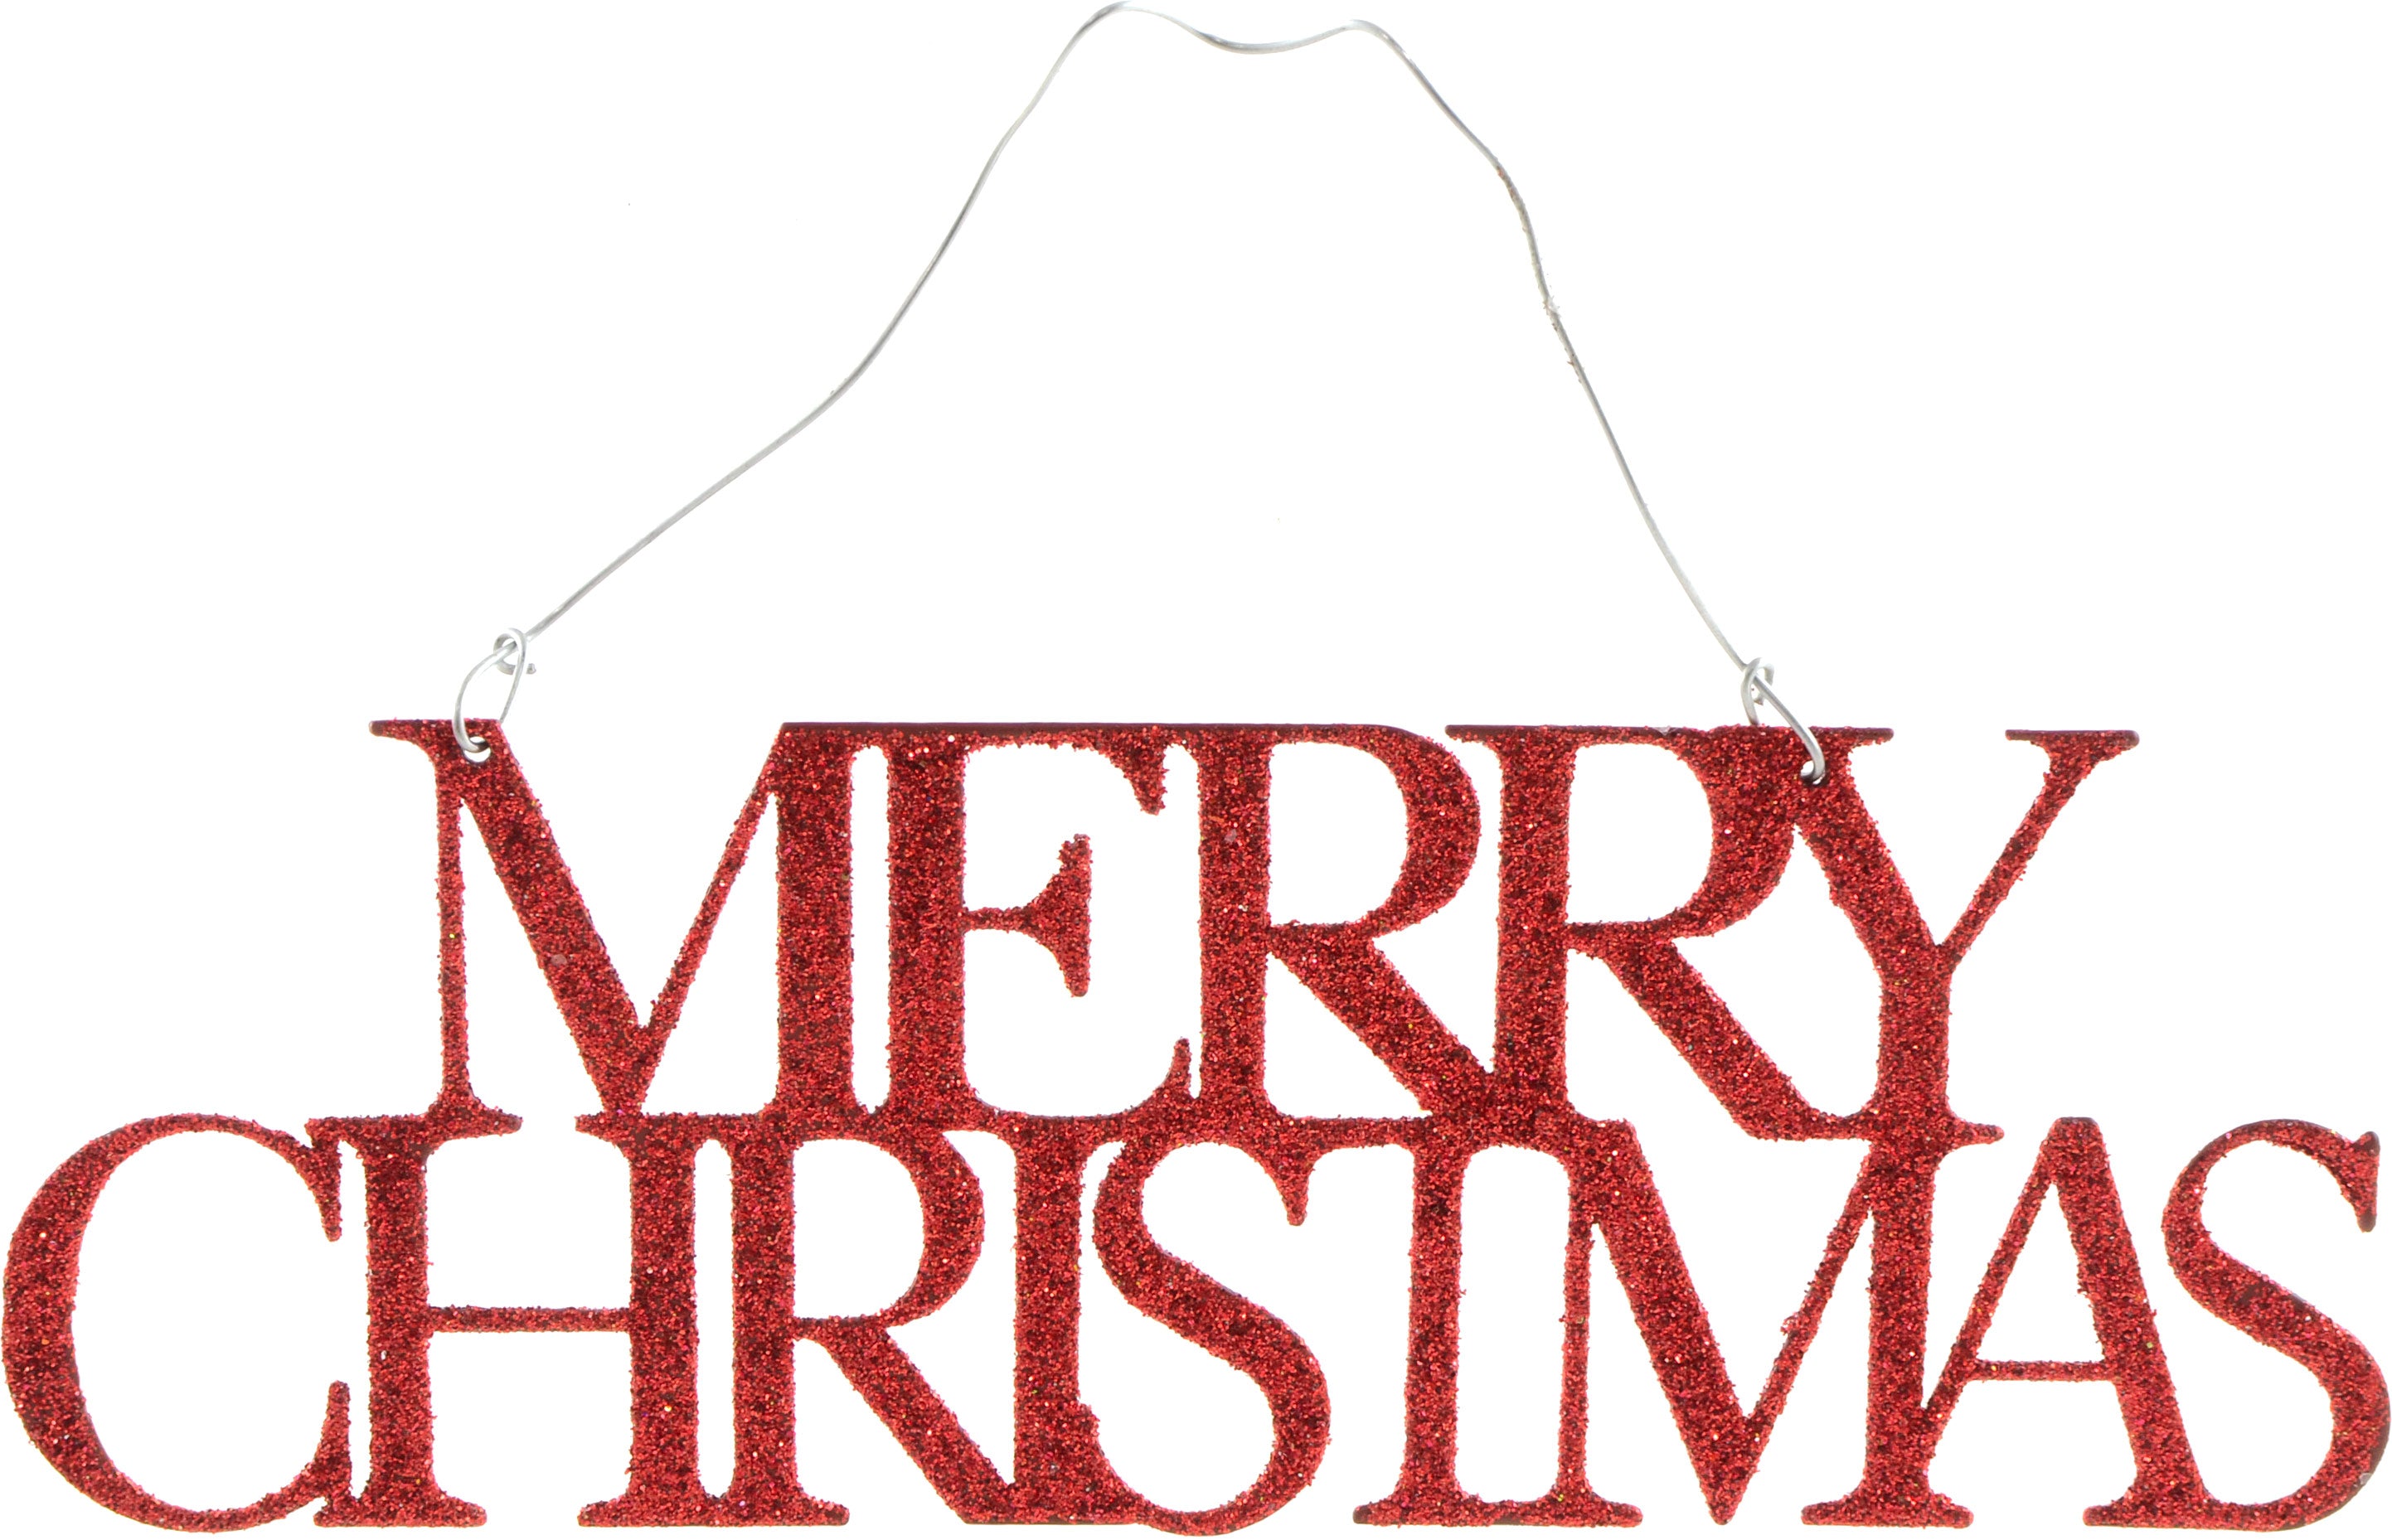 Glittered Words Ornament: Red Merry Christmas